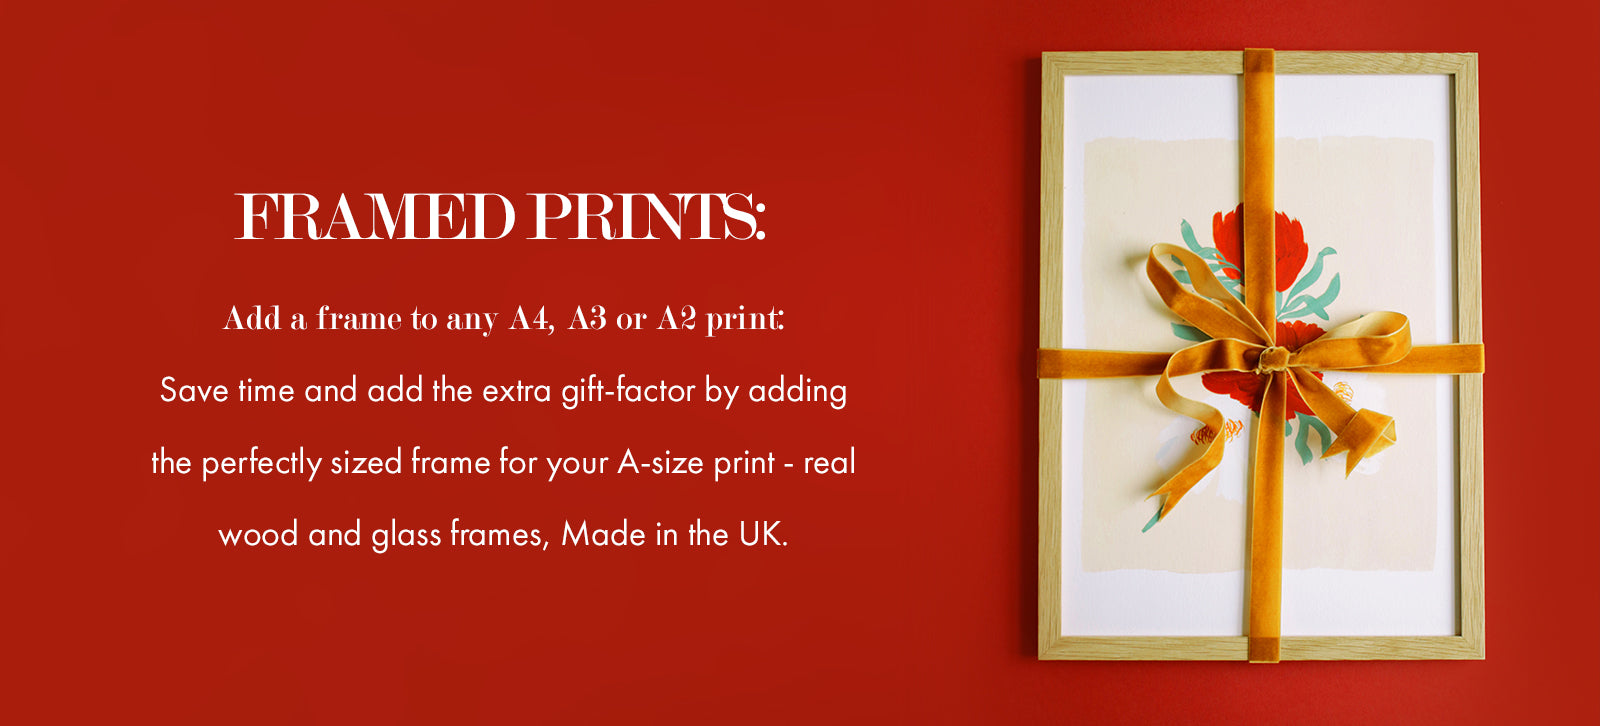 Add a frame to any A4, A3 or A2 print: Save time and add the extra gift-factor by adding the perfectly sized frame for your A-size print - real wood and glass frames, Made in the UK. (image: a framed print, wrapped in a velvet ribbon, on a red background)